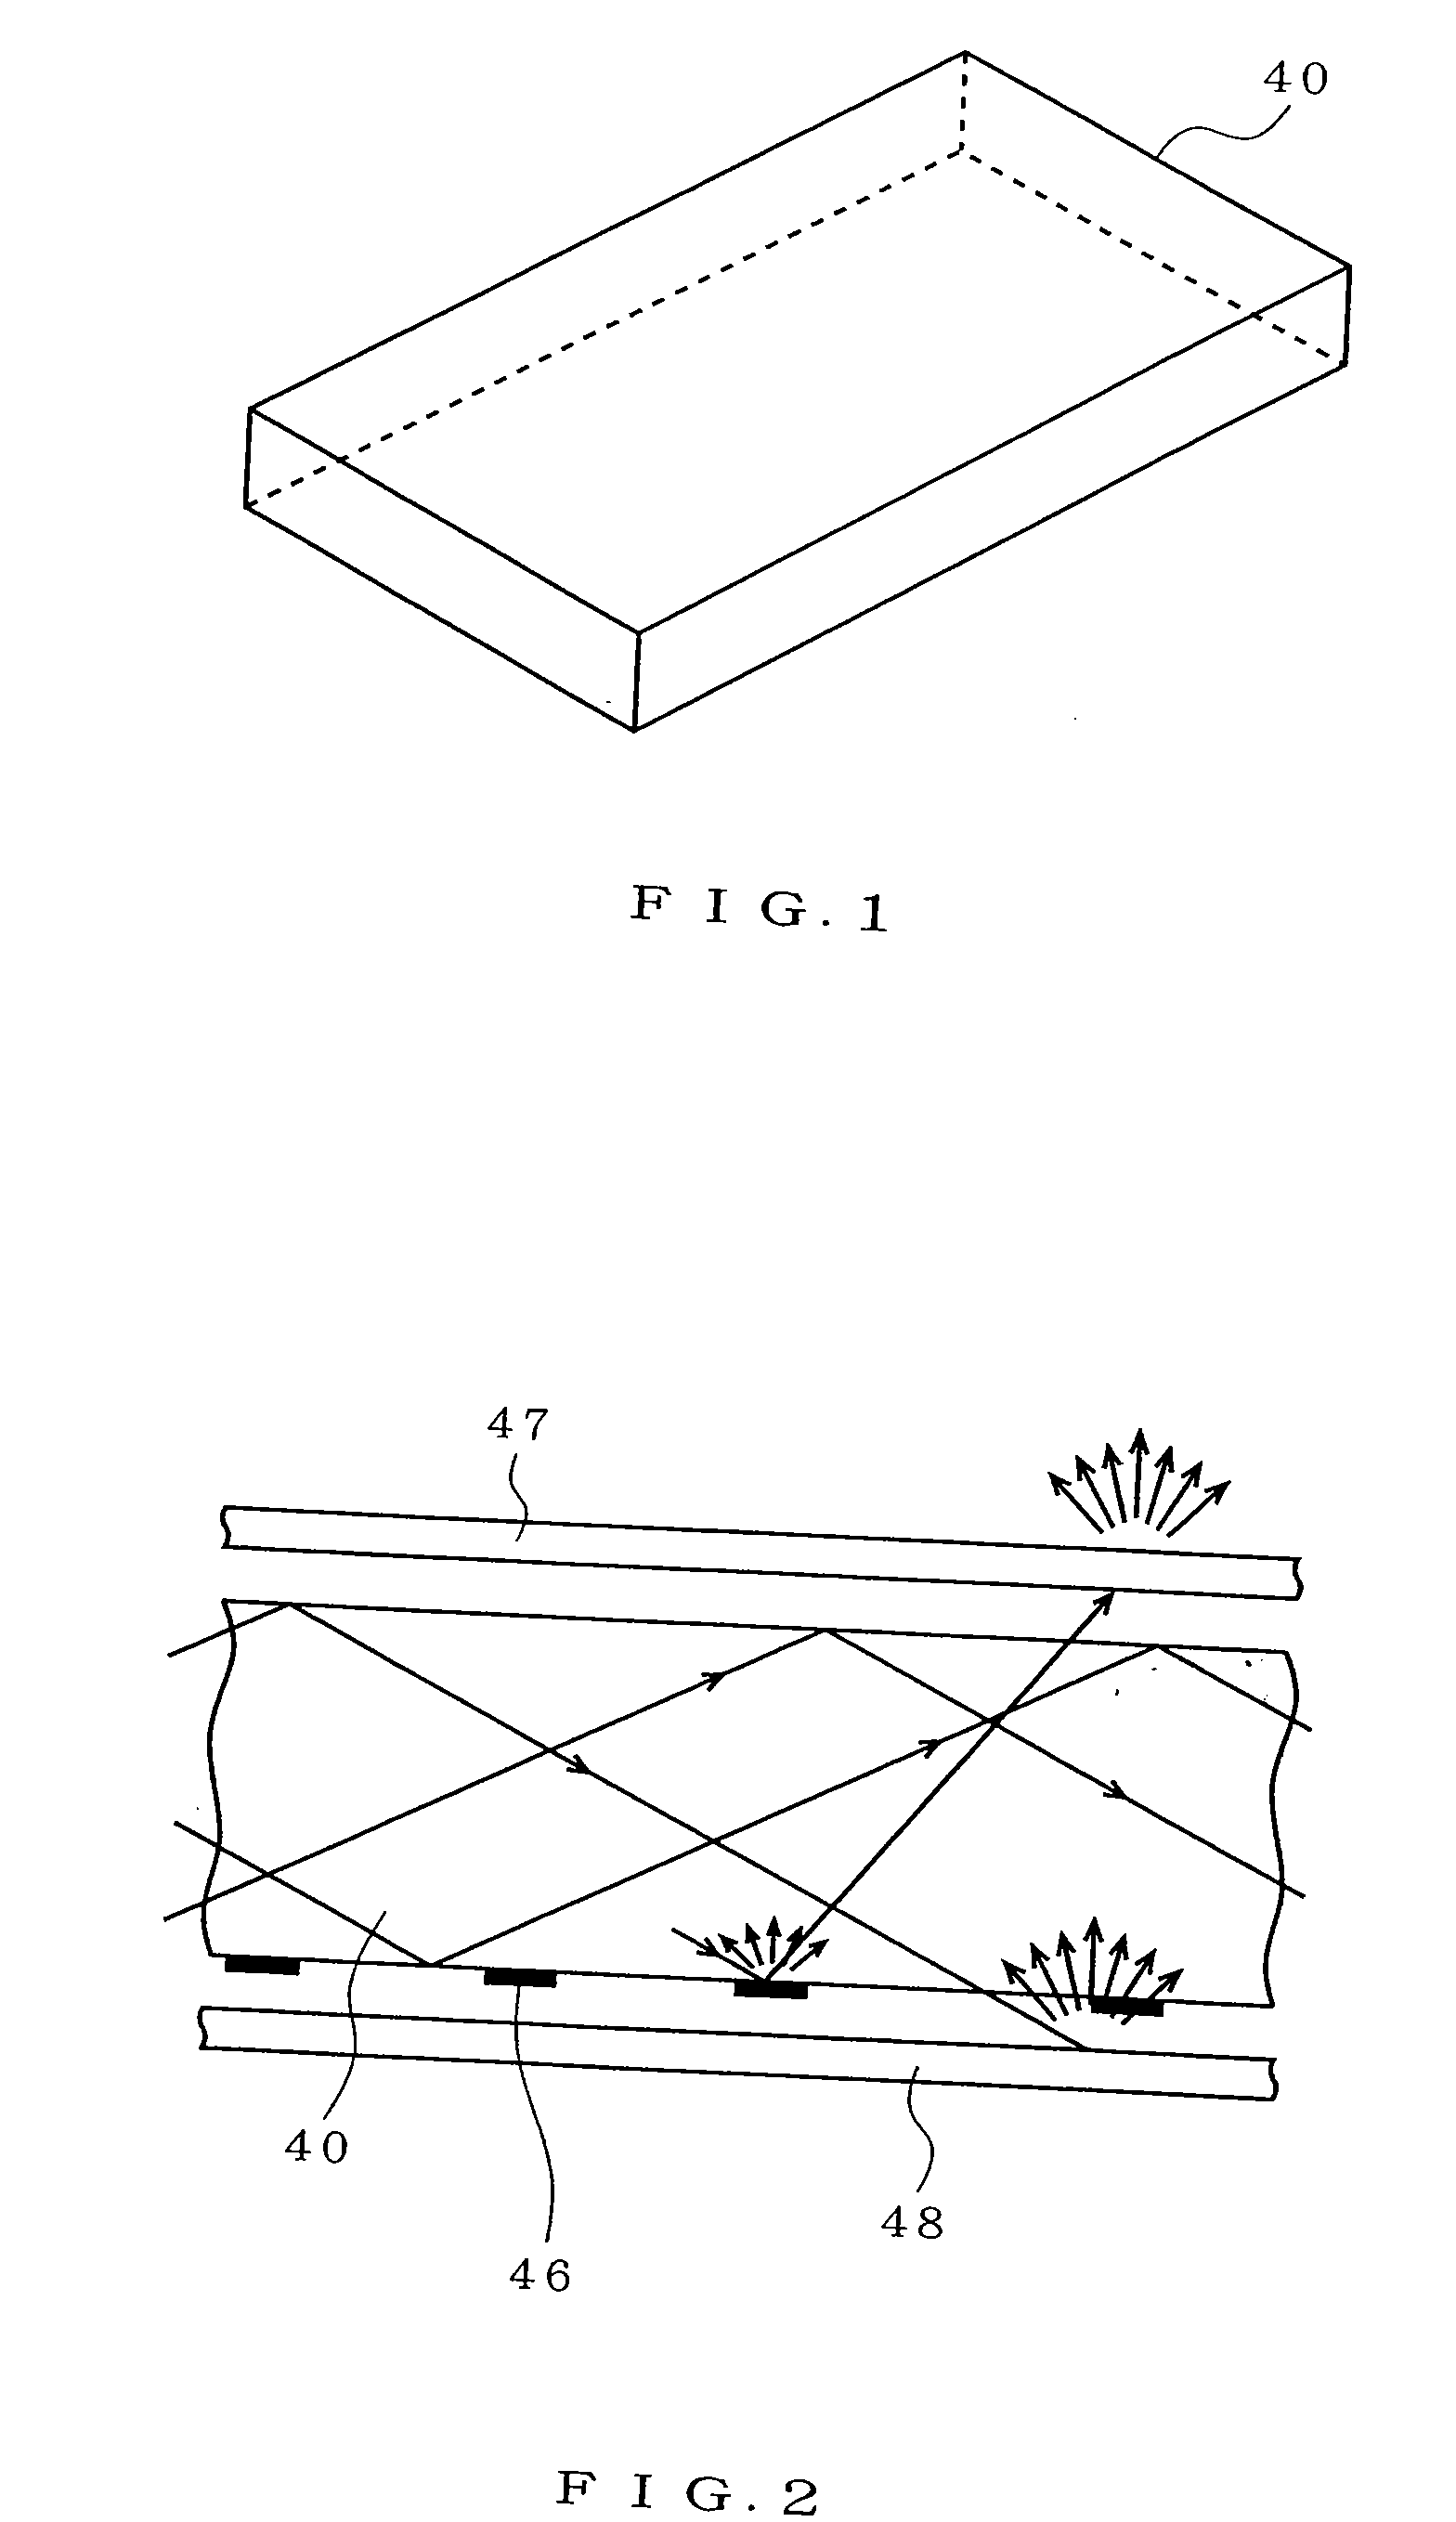 Light-guide plate, area light source apparatus and image reading apparatus